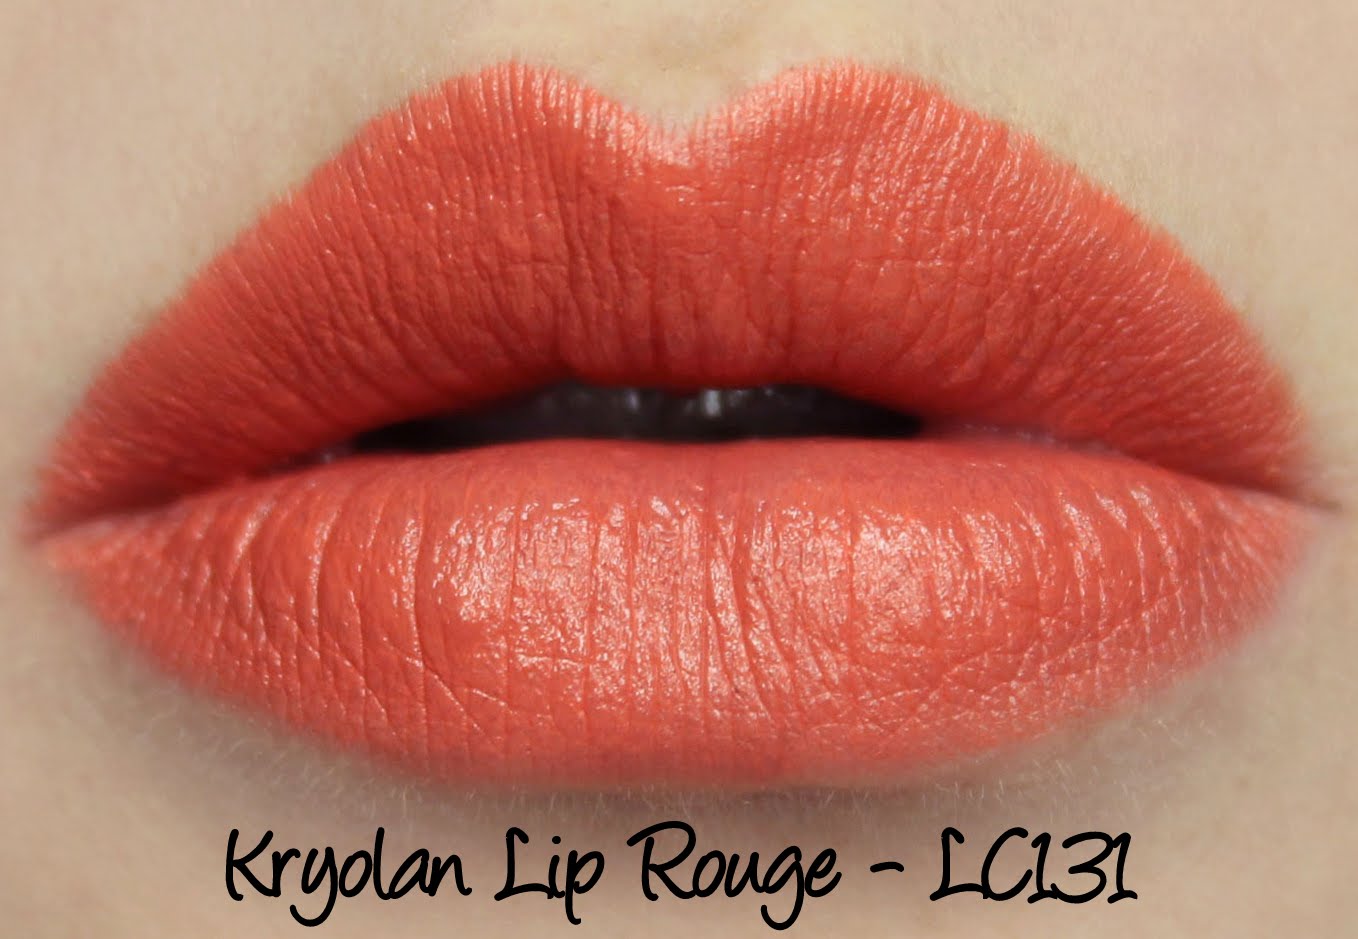 Kryolan Lip Rouge Classic Lipstick LC131 Swatches & Review